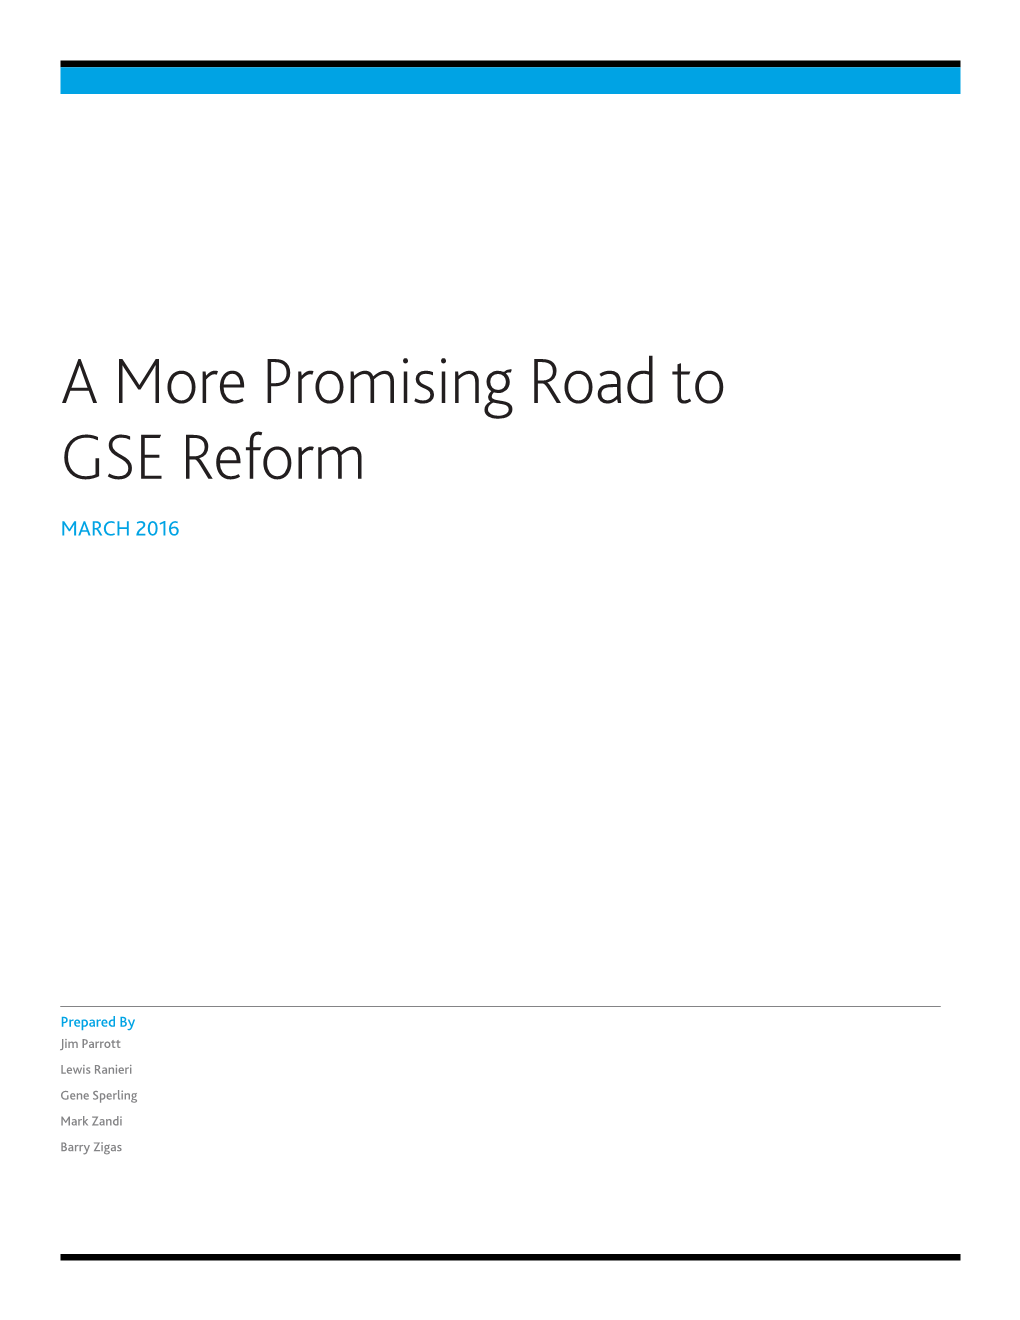 A More Promising Road to GSE Reform